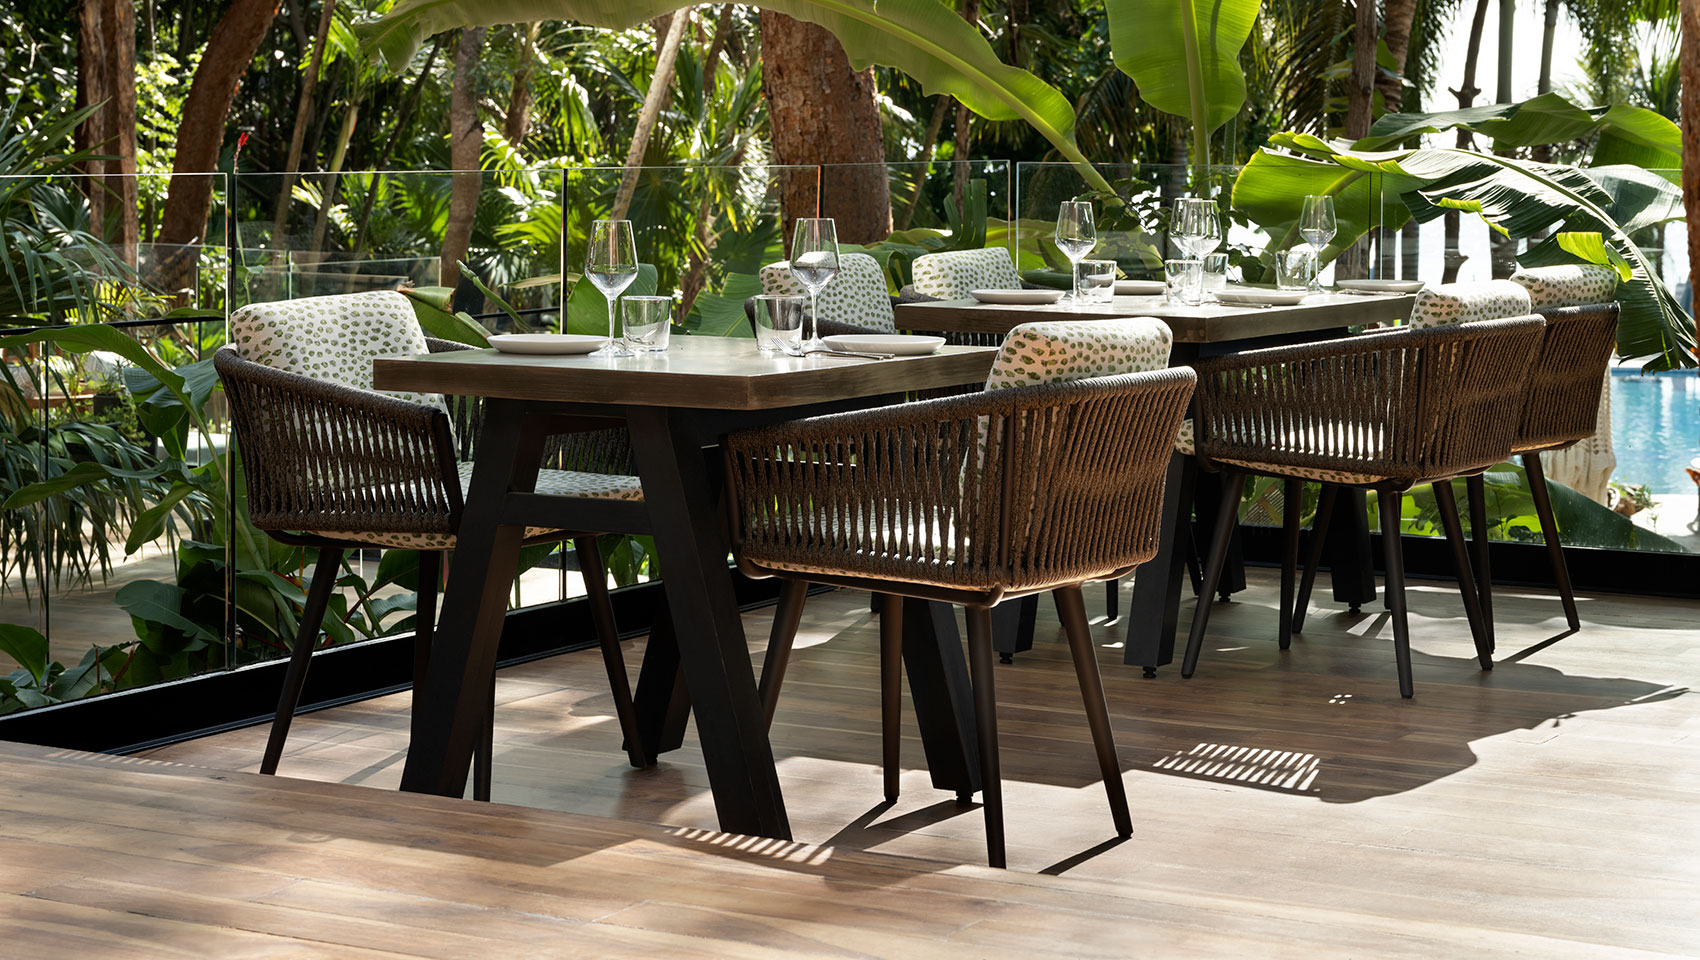 Patio Dining covered with tropical leaves